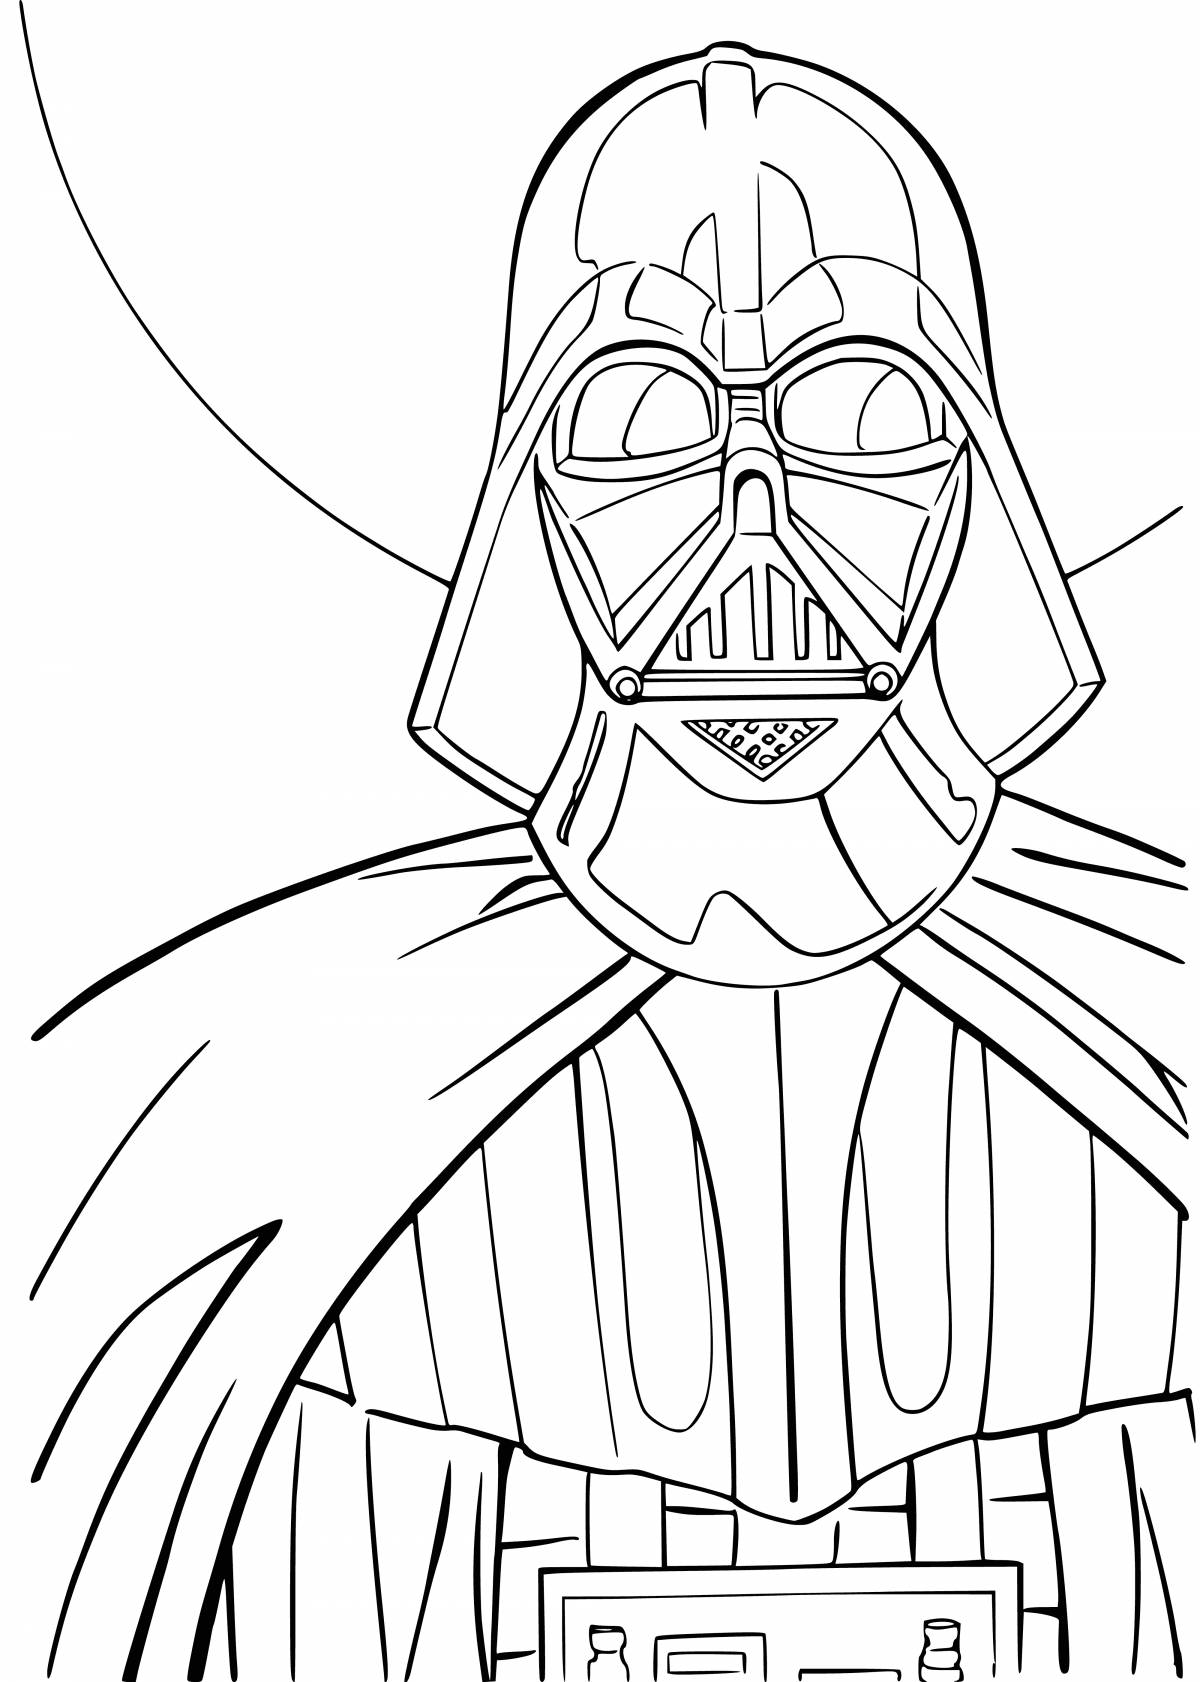 Amazing Star Wars coloring book for kids